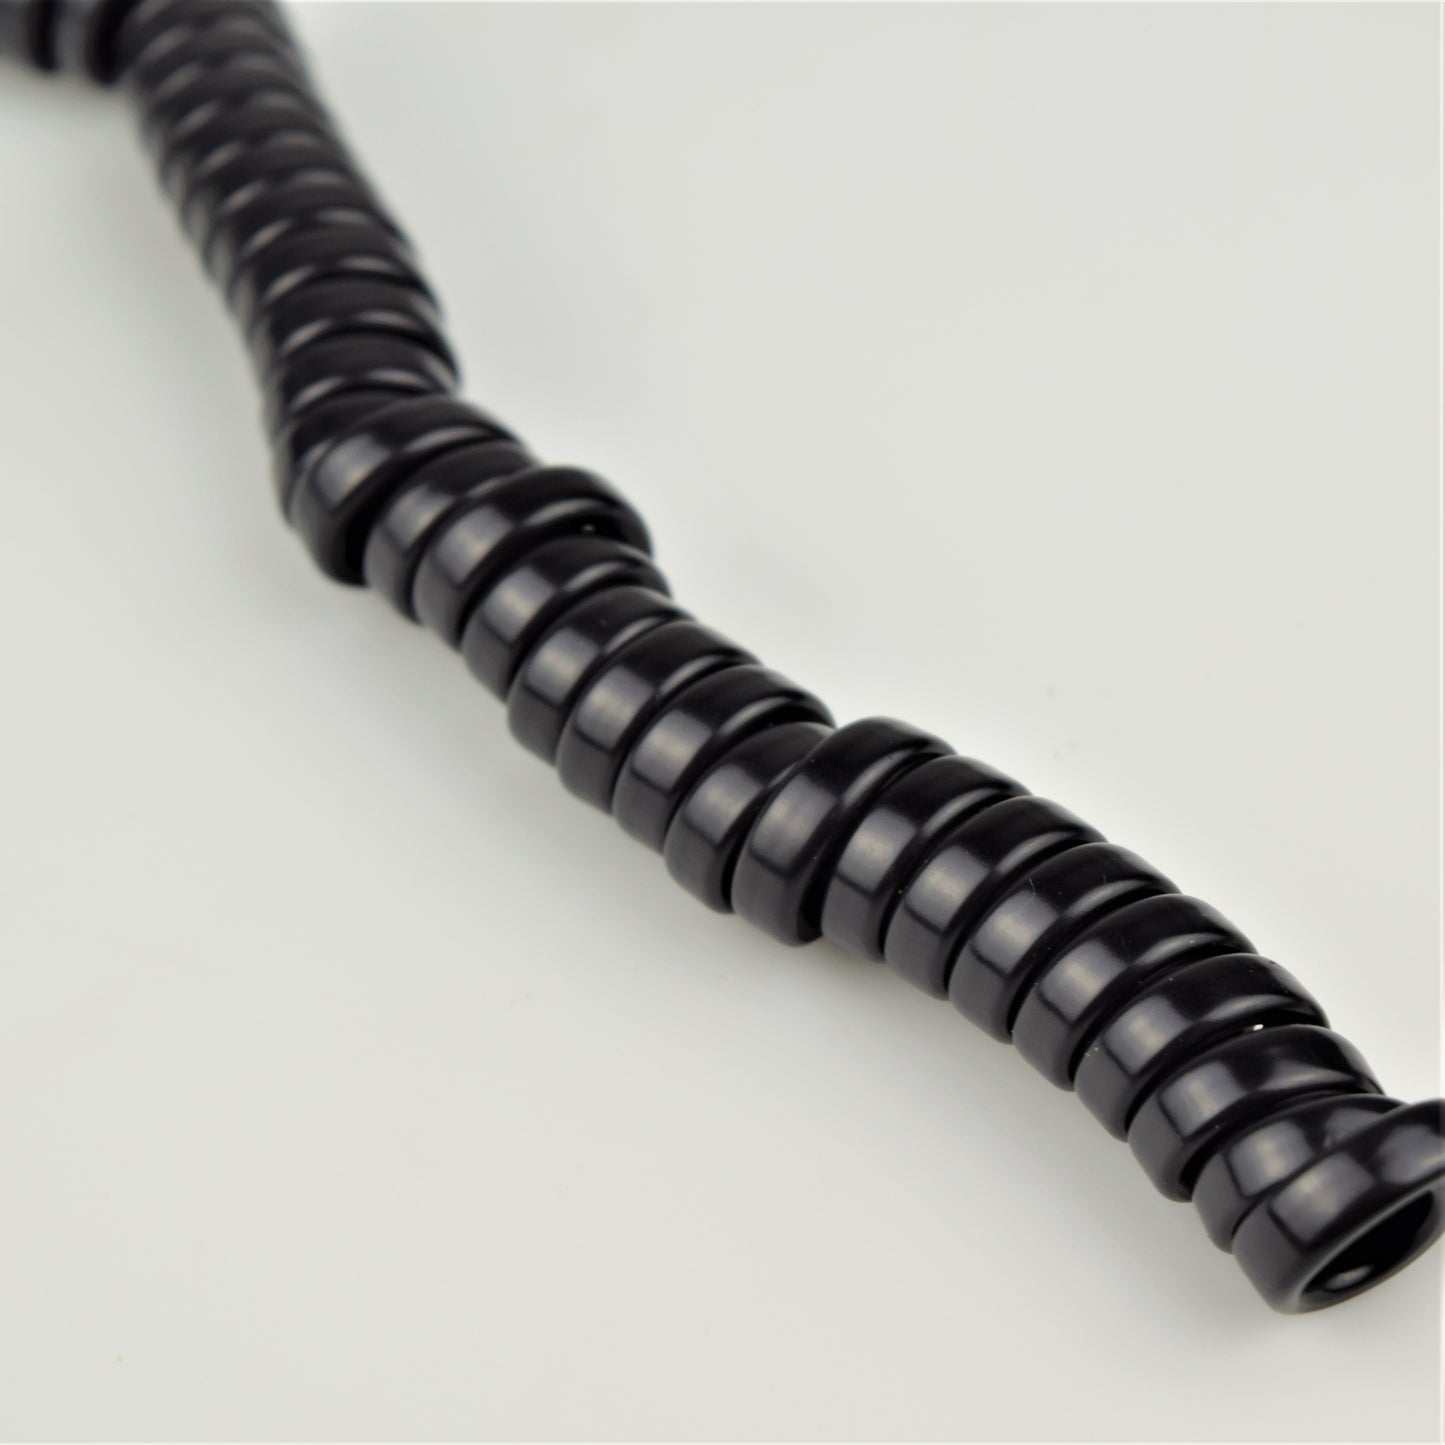 Cord - Handset - Black - flat - Curly - 4 Conductor - spade terminations.